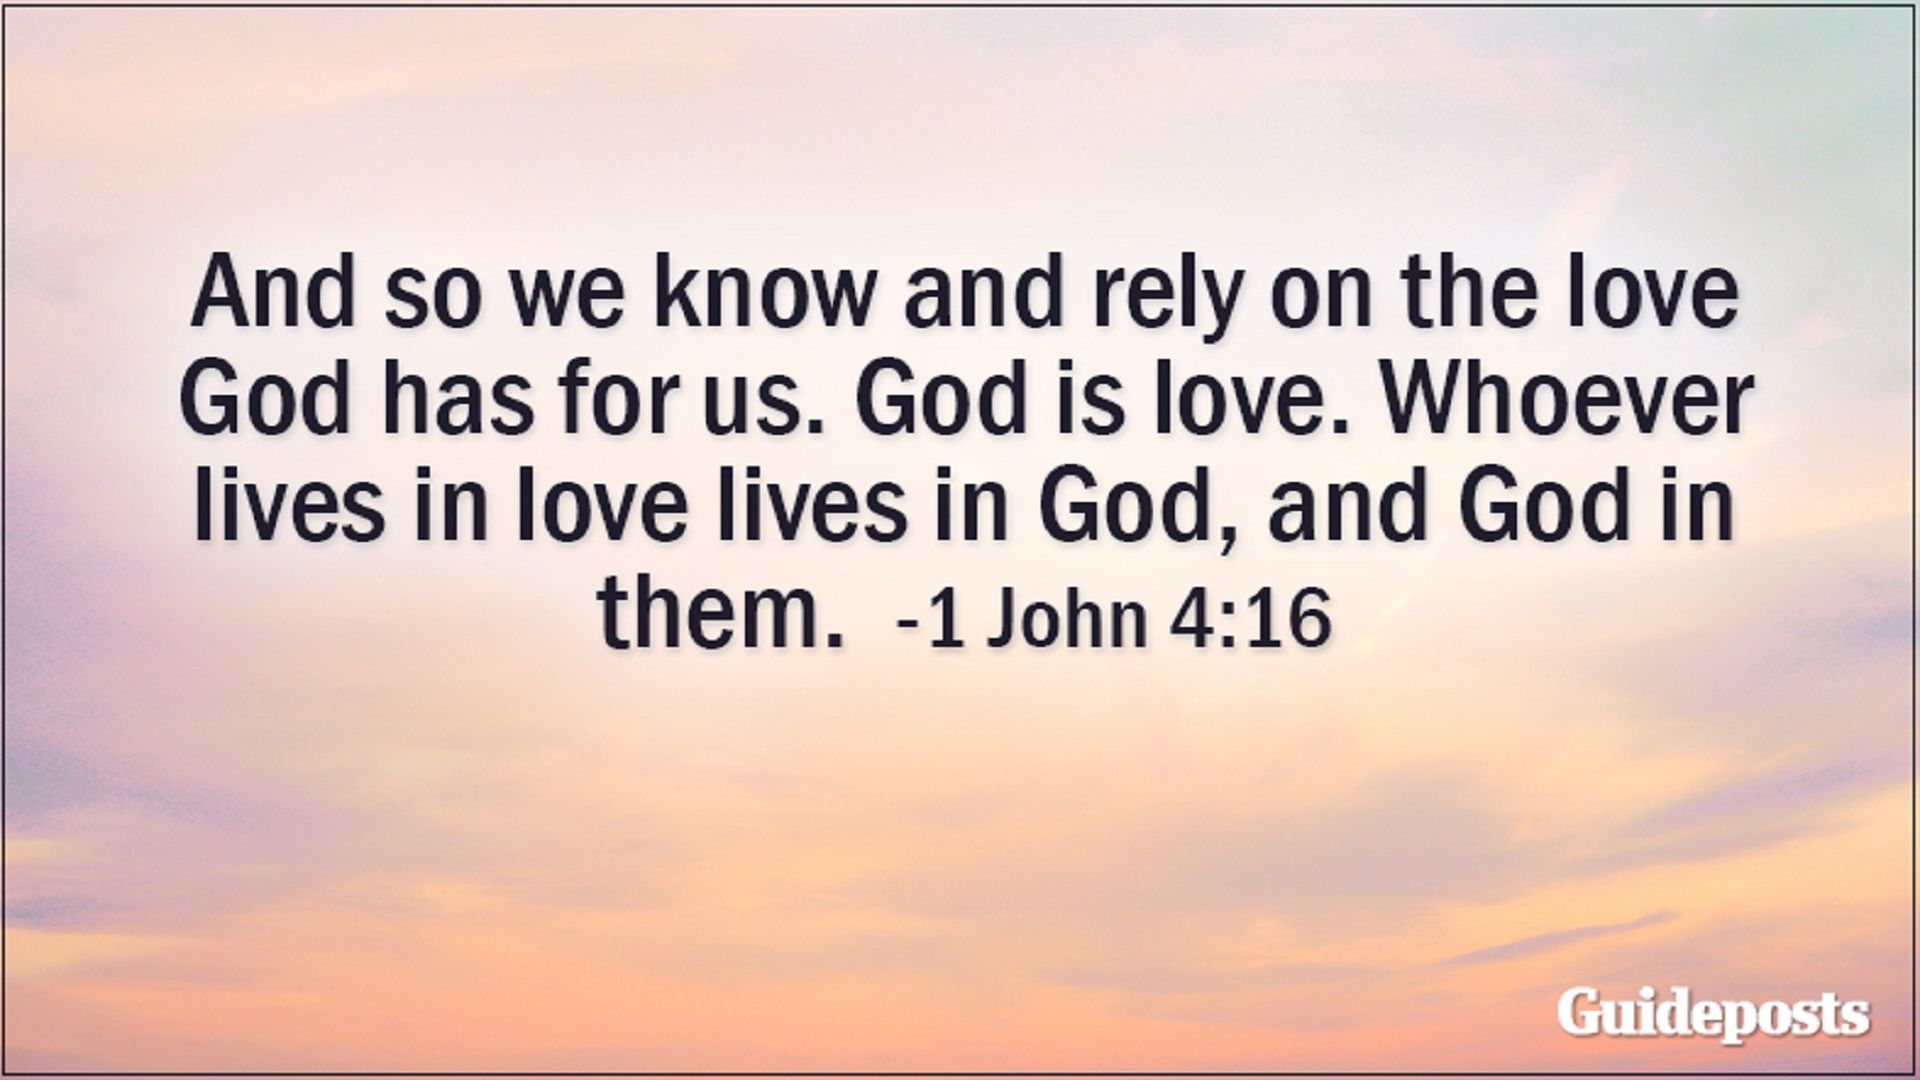 And so we know and rely on the love God has for us. God is love. Whoever lives in love lives in God, and God in them. 1 John 4:16